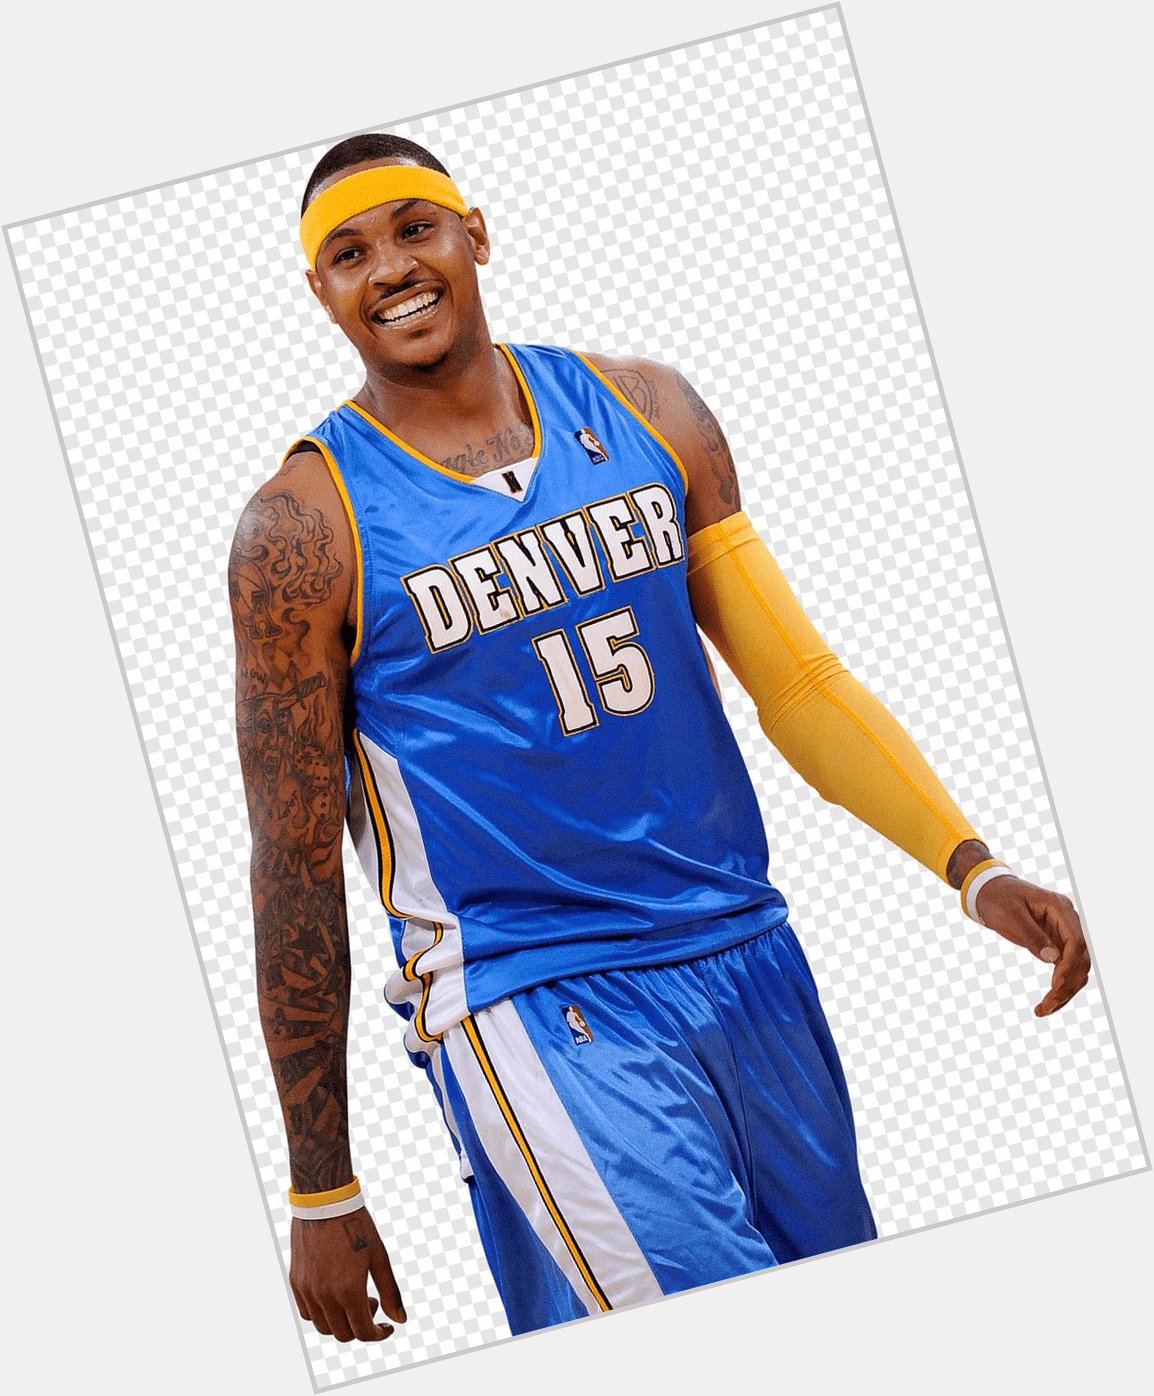 Happy birthday to Carmelo Anthony!! Have an awesome day! 